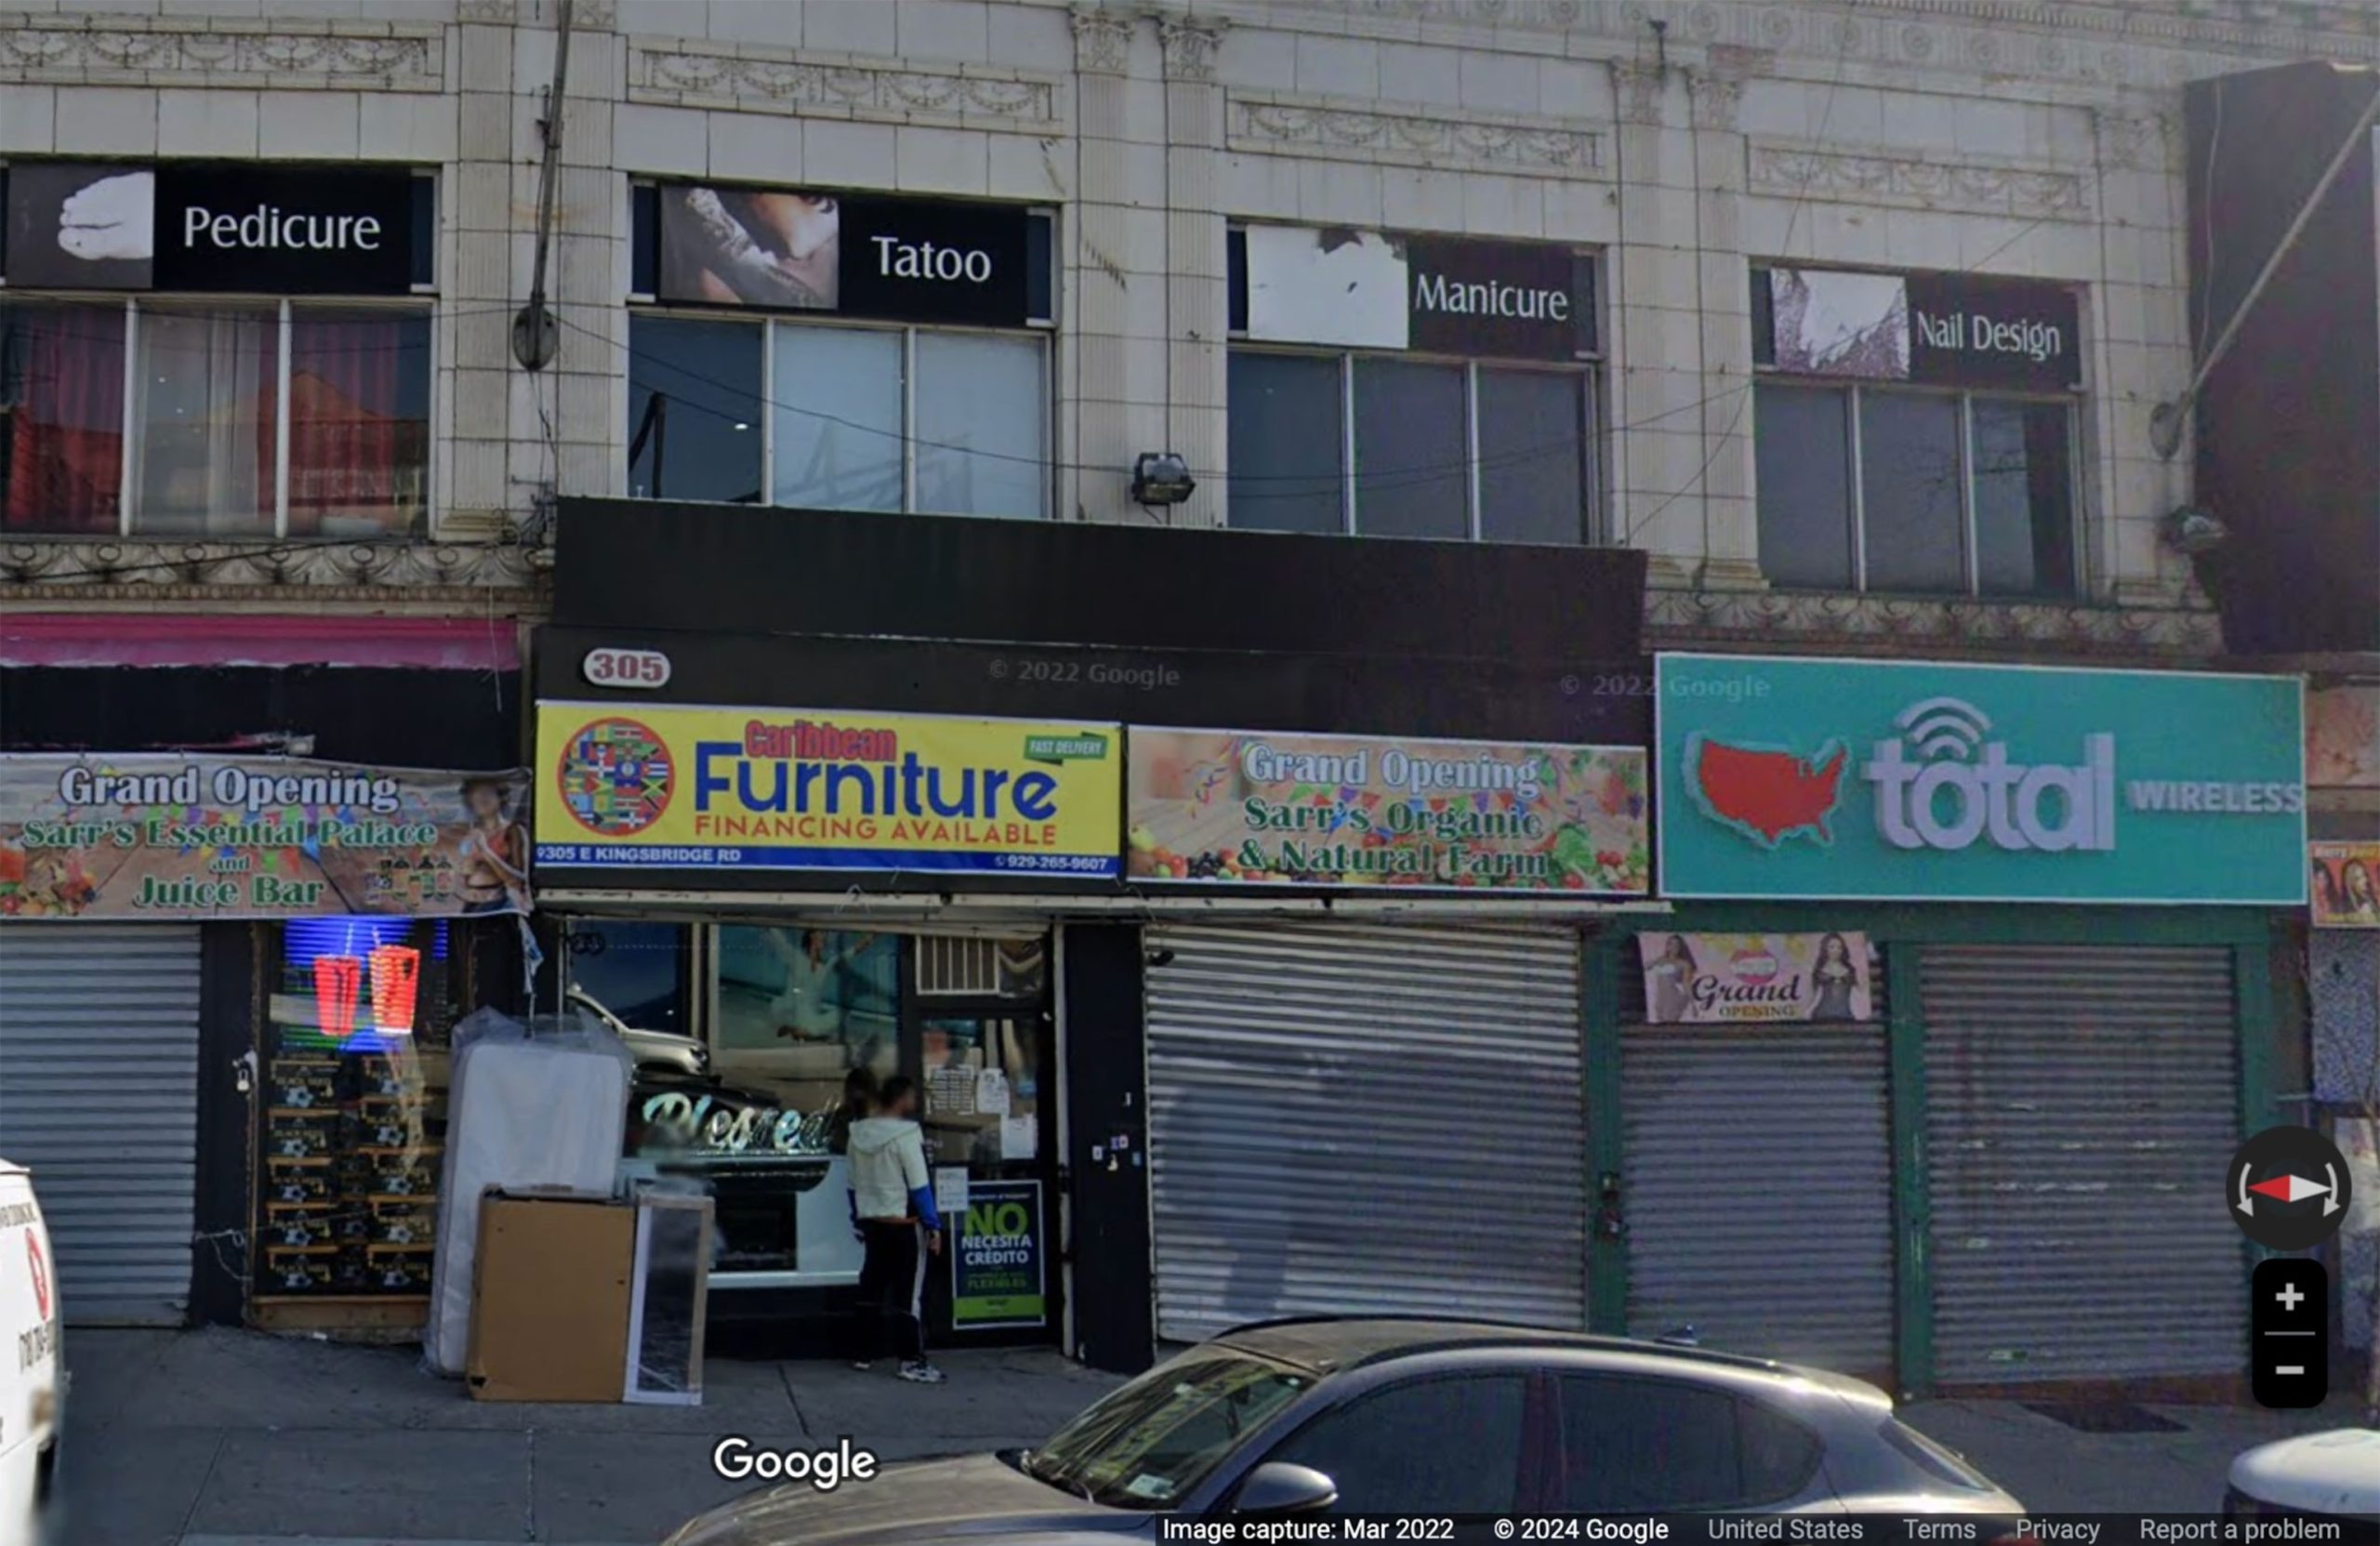 Illegal Housing of Migrants Discovered in New York City Furniture Store